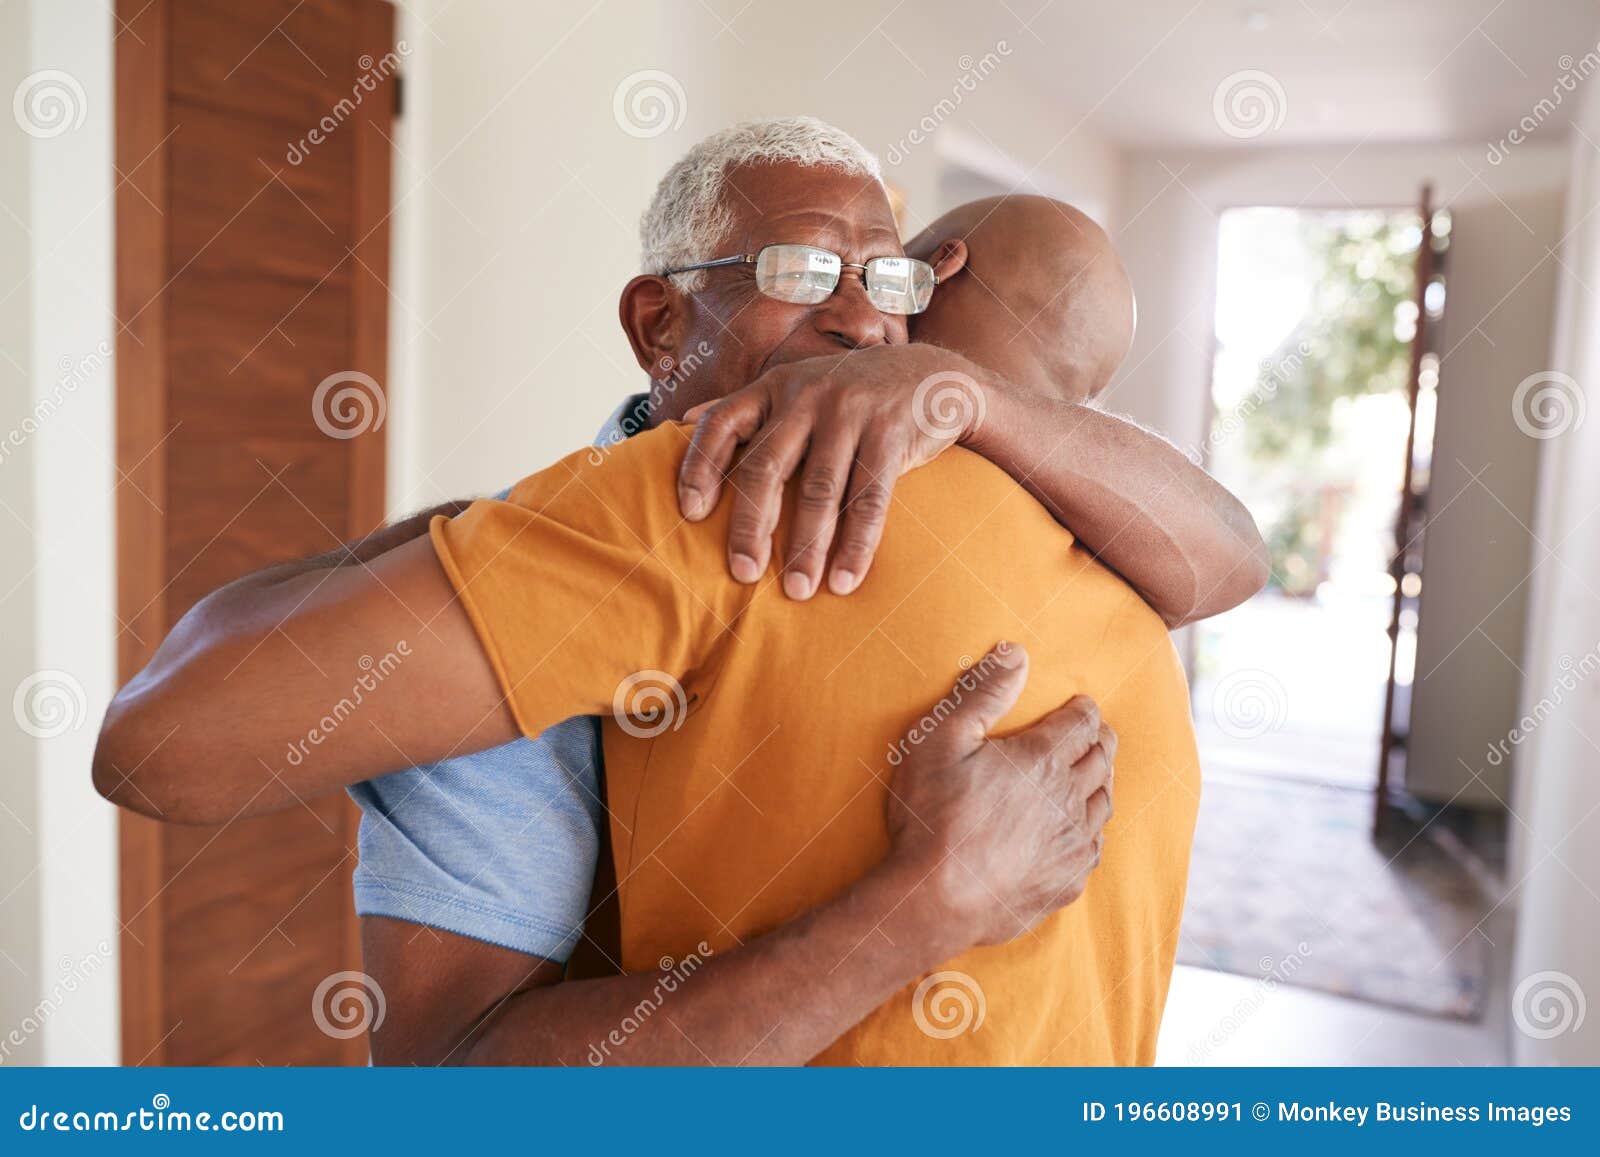 loving senior father hugging adult son indoors at home